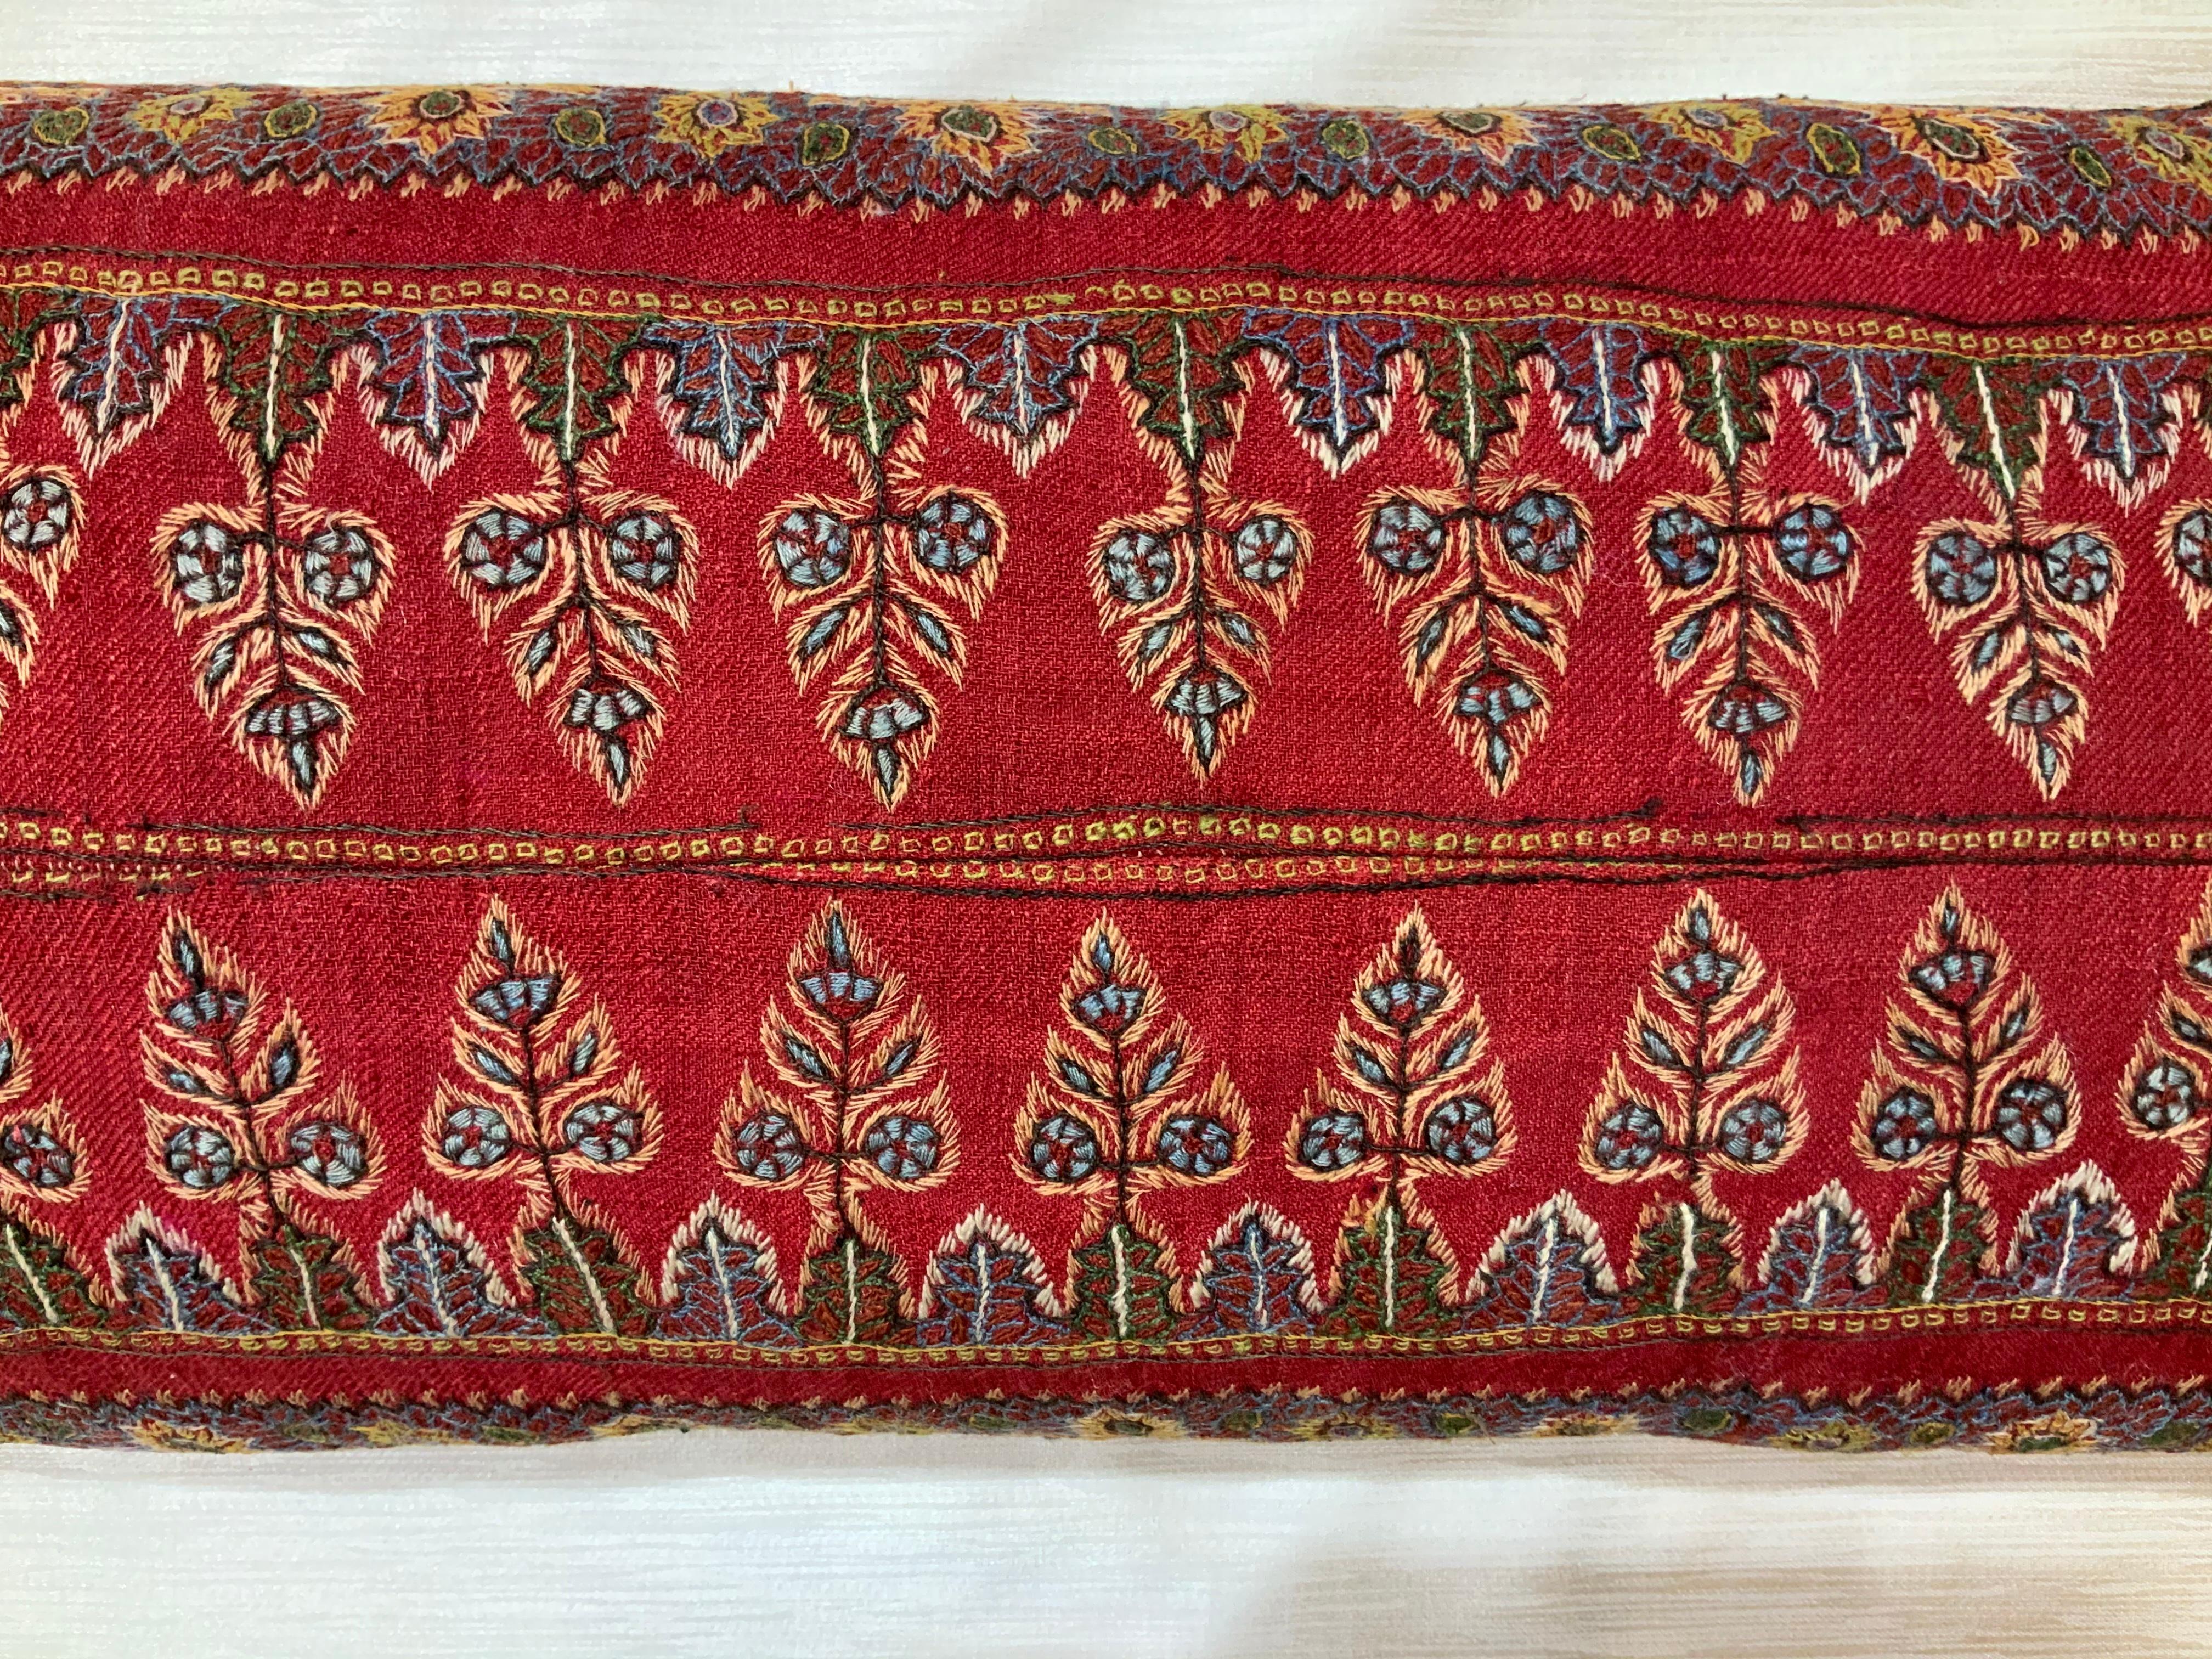 Single Hand Antique Embroidery Suzani Pillow 1